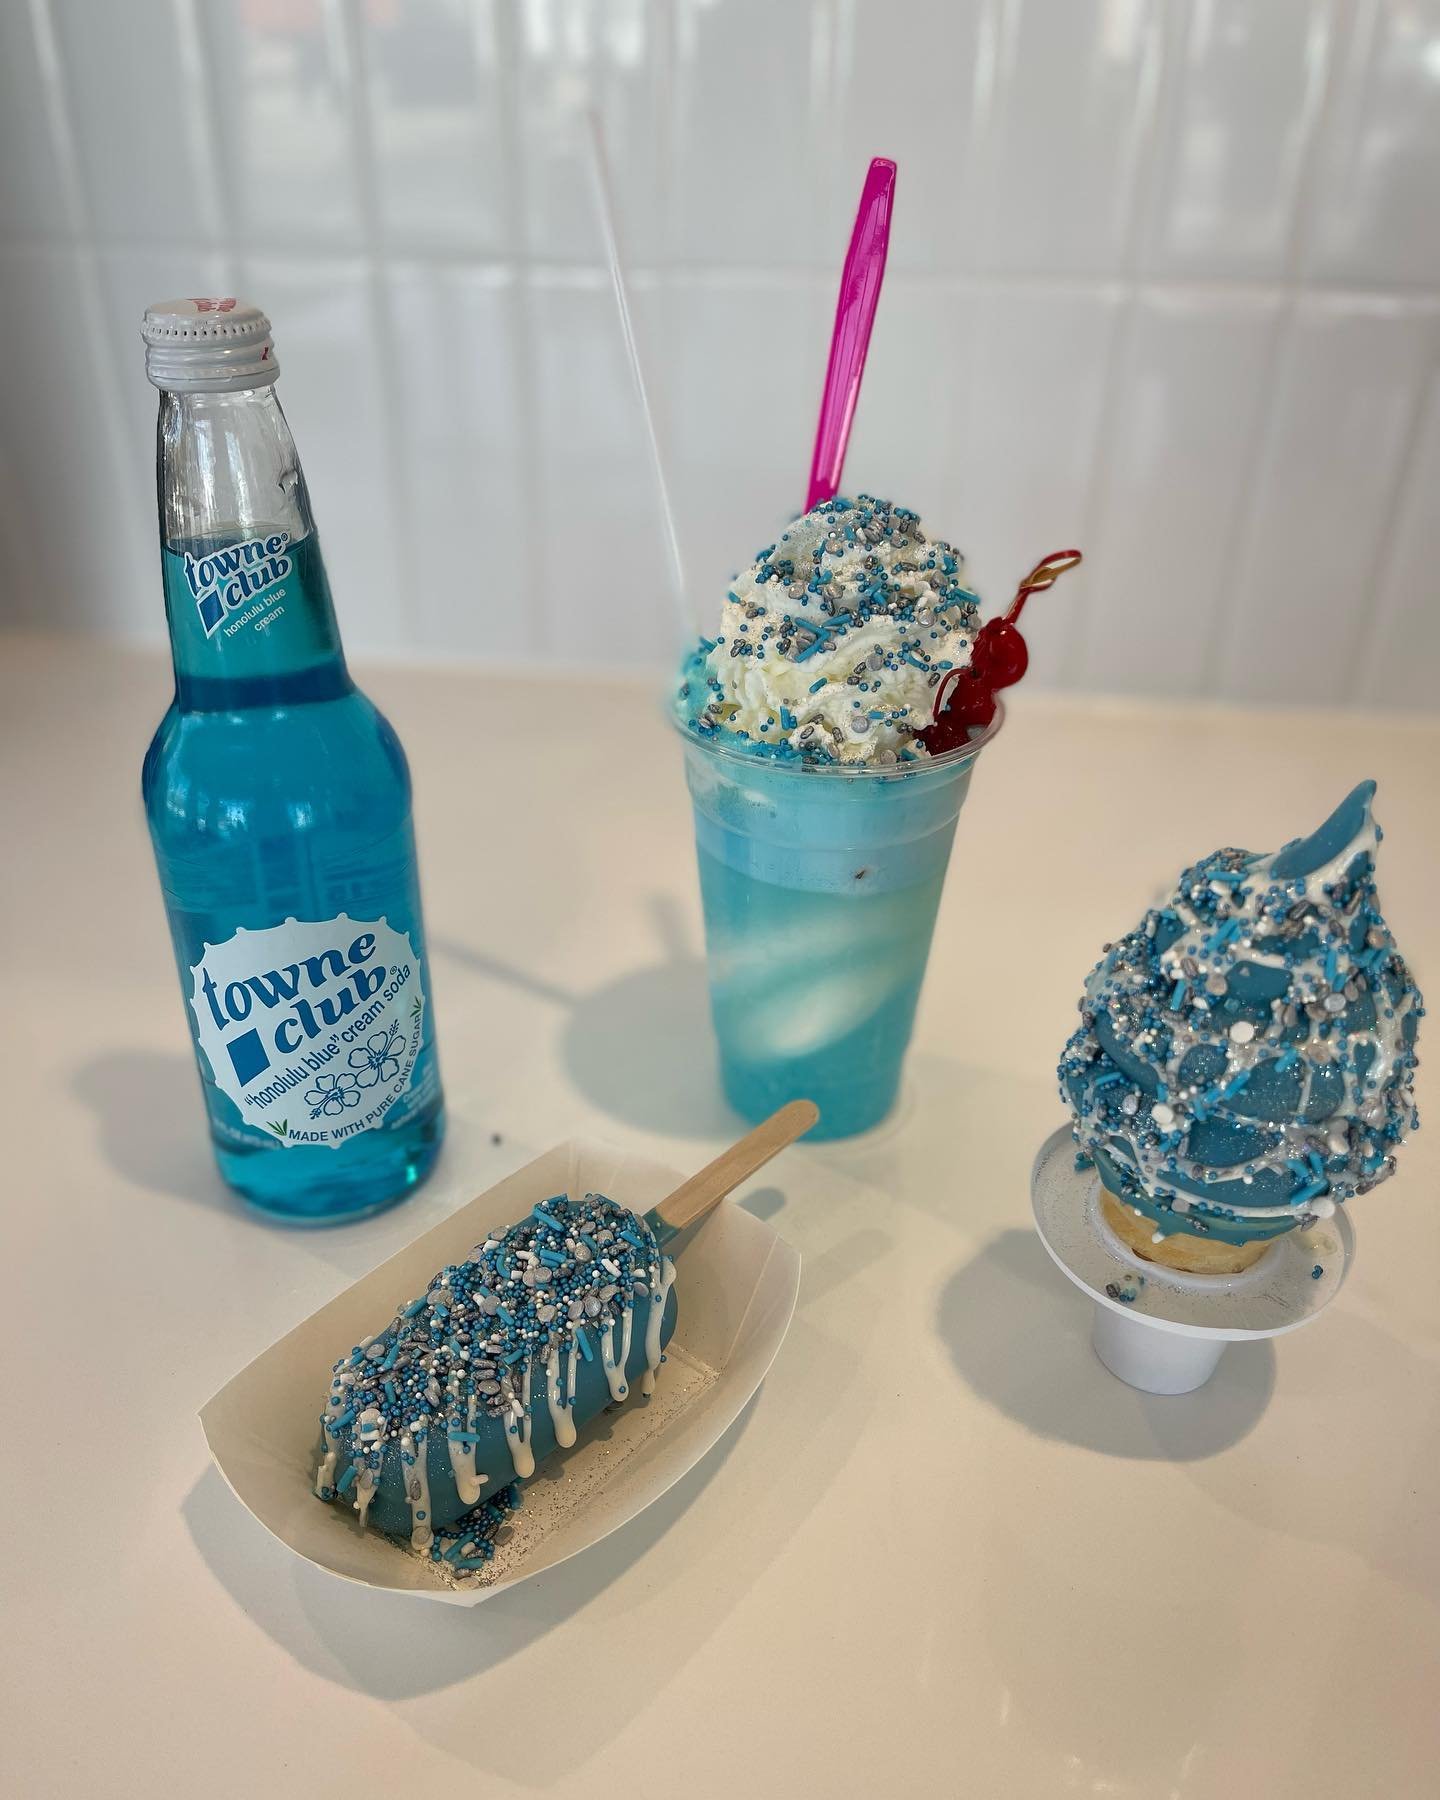 Get your 🩵 HONOLULU BLUE 🩵 on for #NFLDraft weekend! Ask about our roar-berry draftsicle and @towneclubsoda Honolulu blue float. 🏈🦁 open 12-8 today!